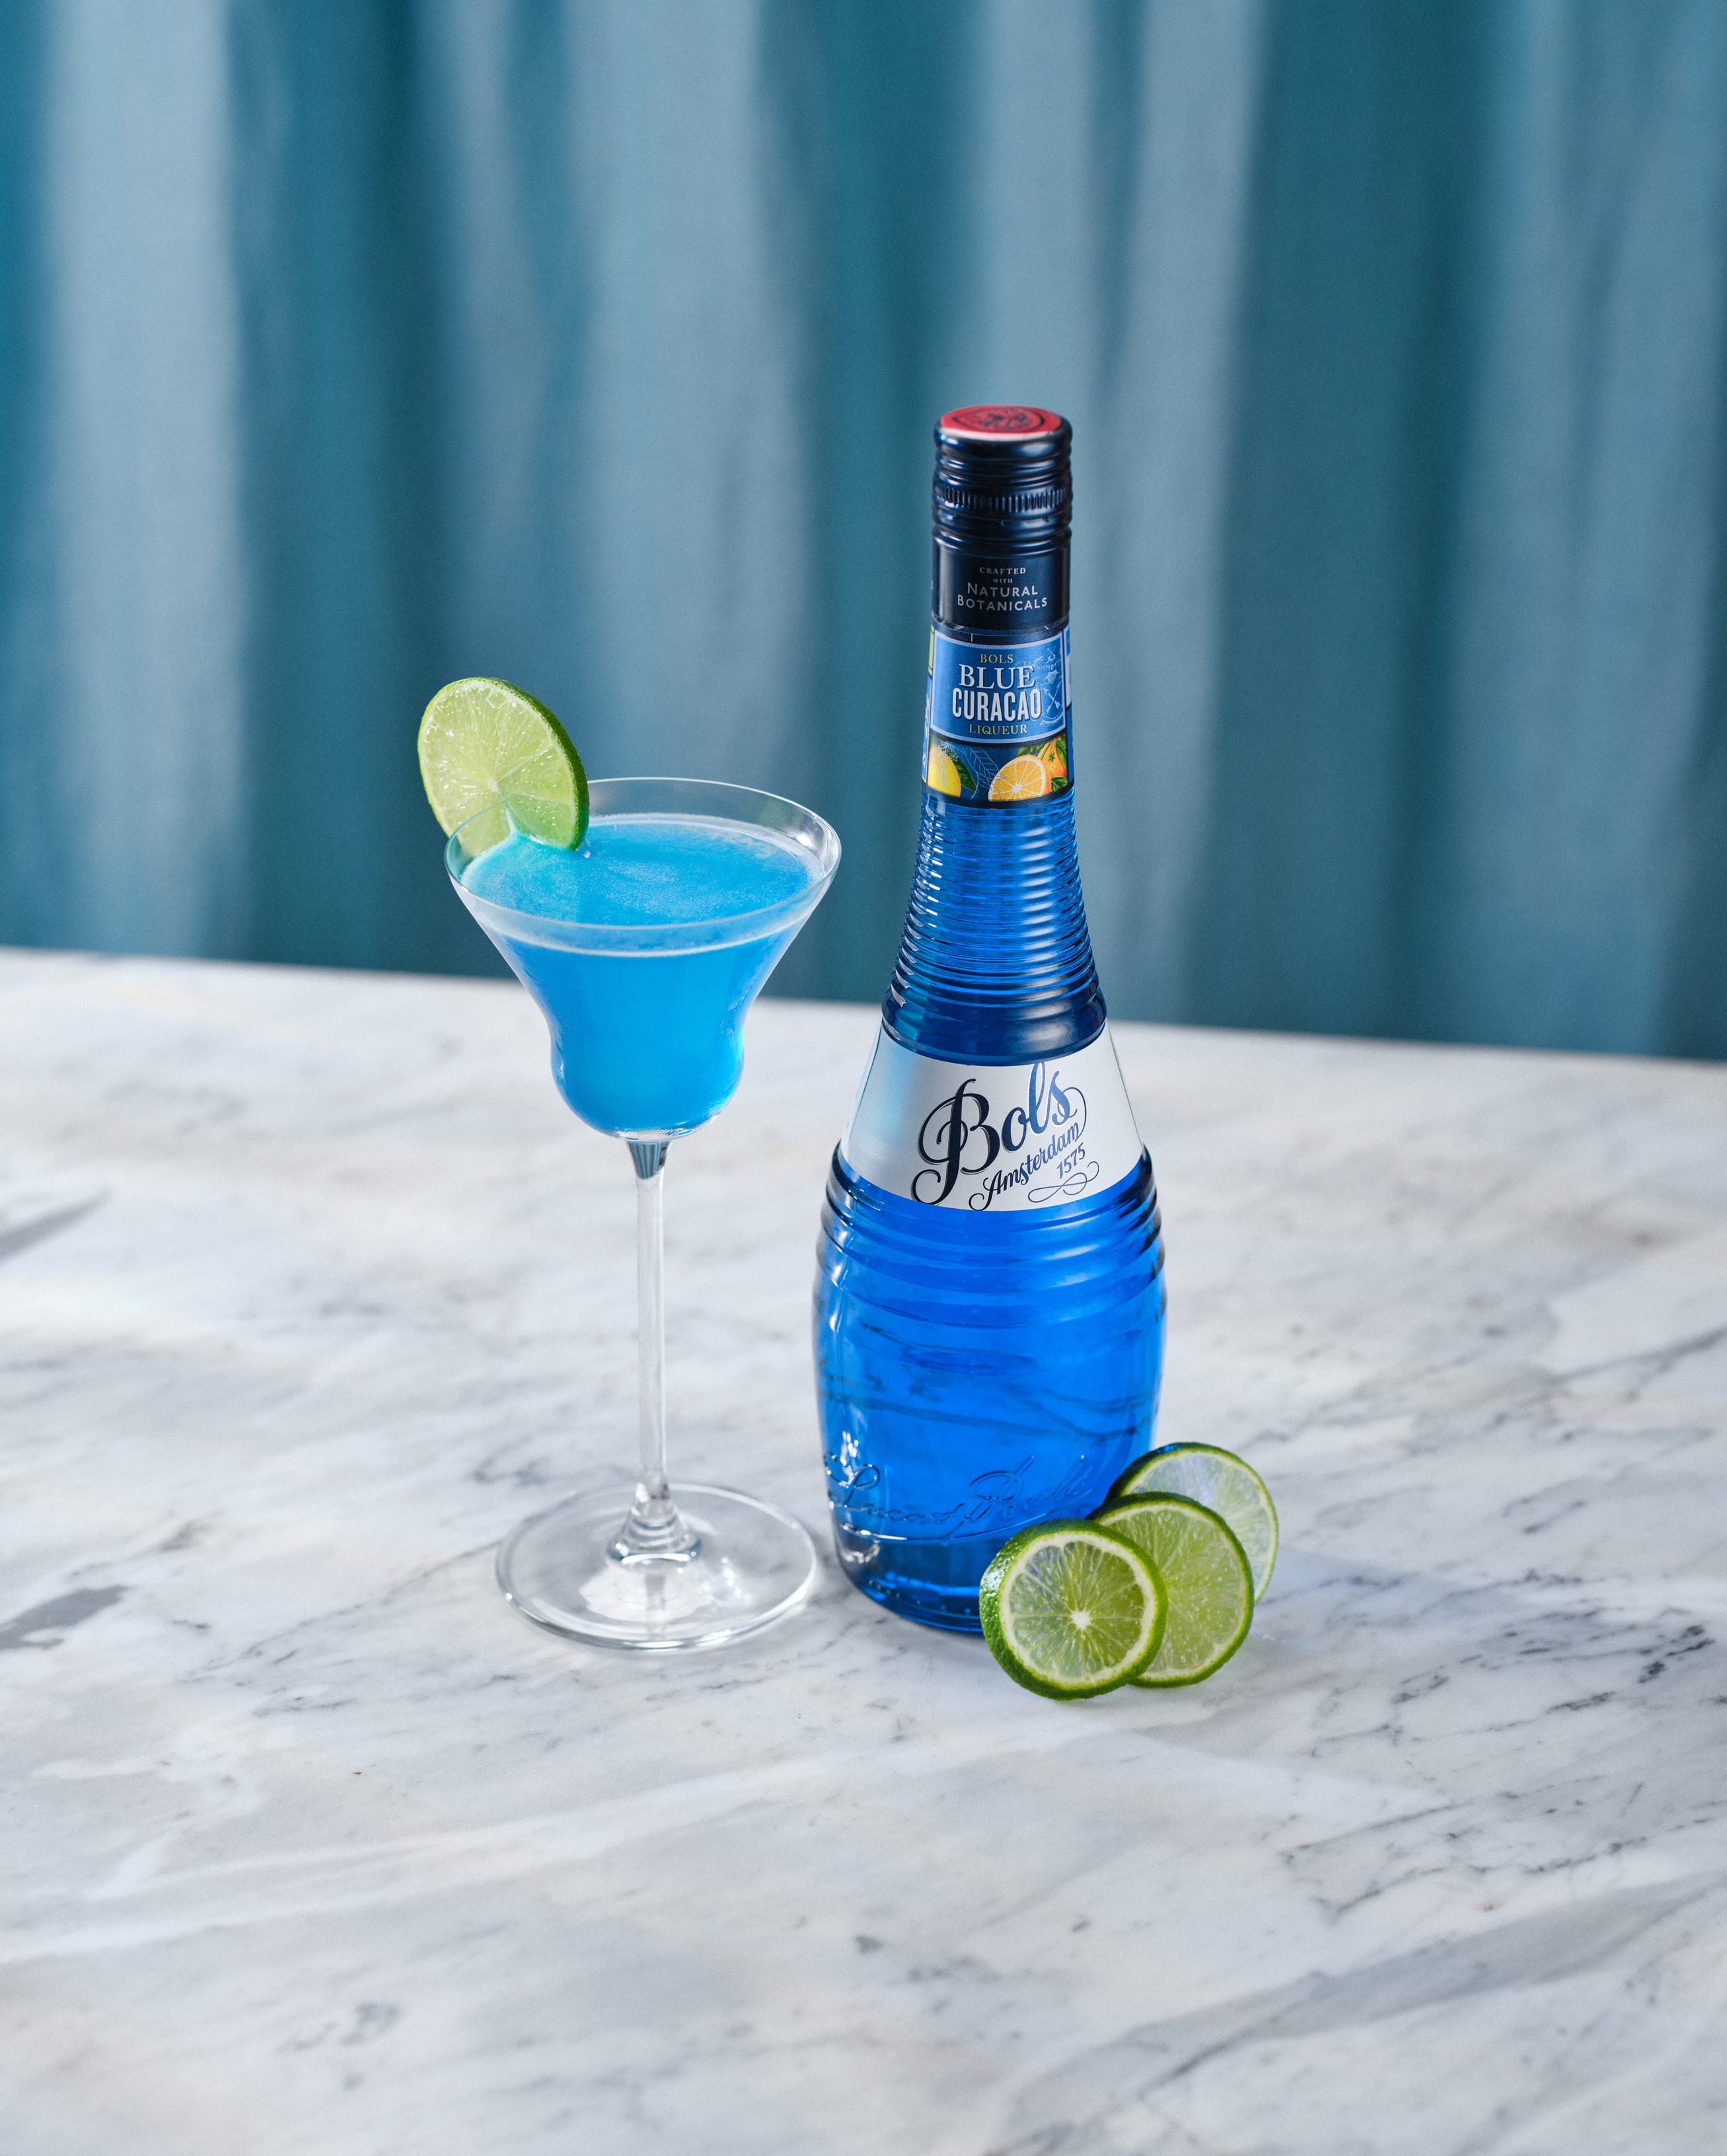 Margarita Azul Cocktail Recipe with Bols Blue Curacao Product